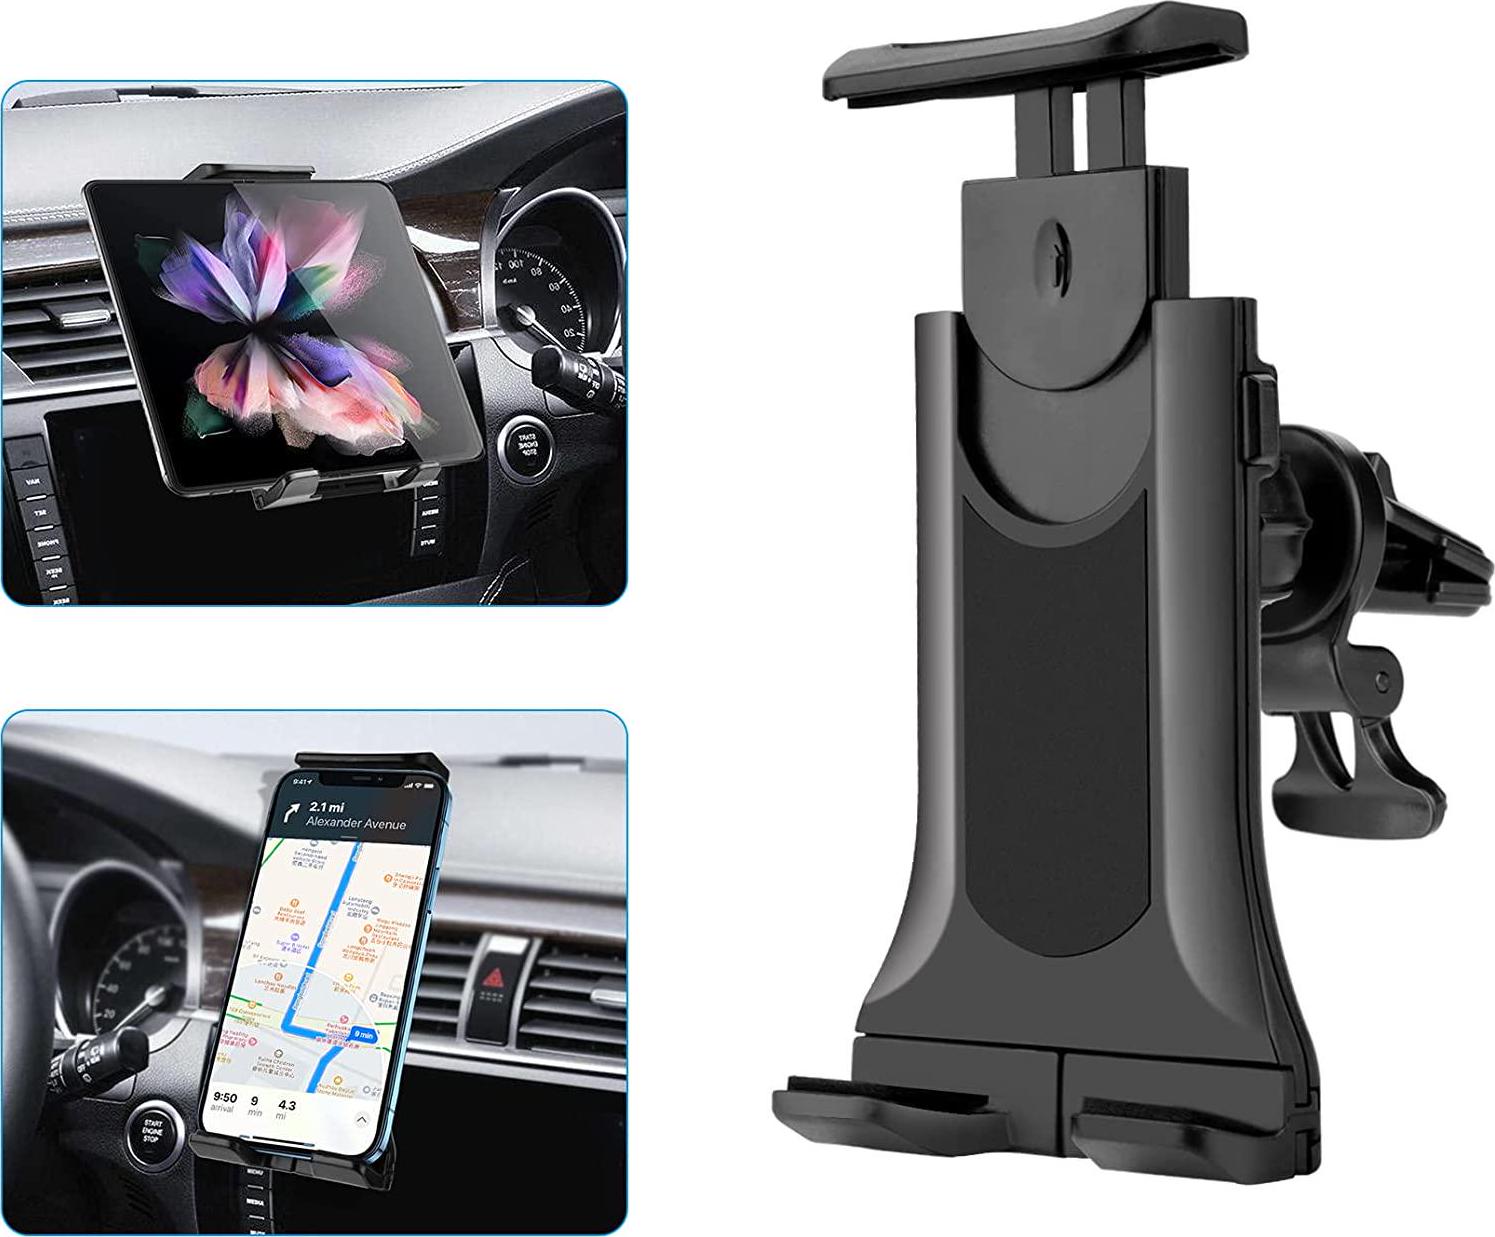 Lopnord, Lopnord Z Fold 3 Car Mount, Car Phone Holder Tablet Mount Compatible with Samsung Galaxy Z Fold 3/Z Flip 3/S22/S21/iPhone 13 Pro Max, Car Air Vent Tablet Stand for 4-10.5'' Tablet/iPad Pro Air Mini